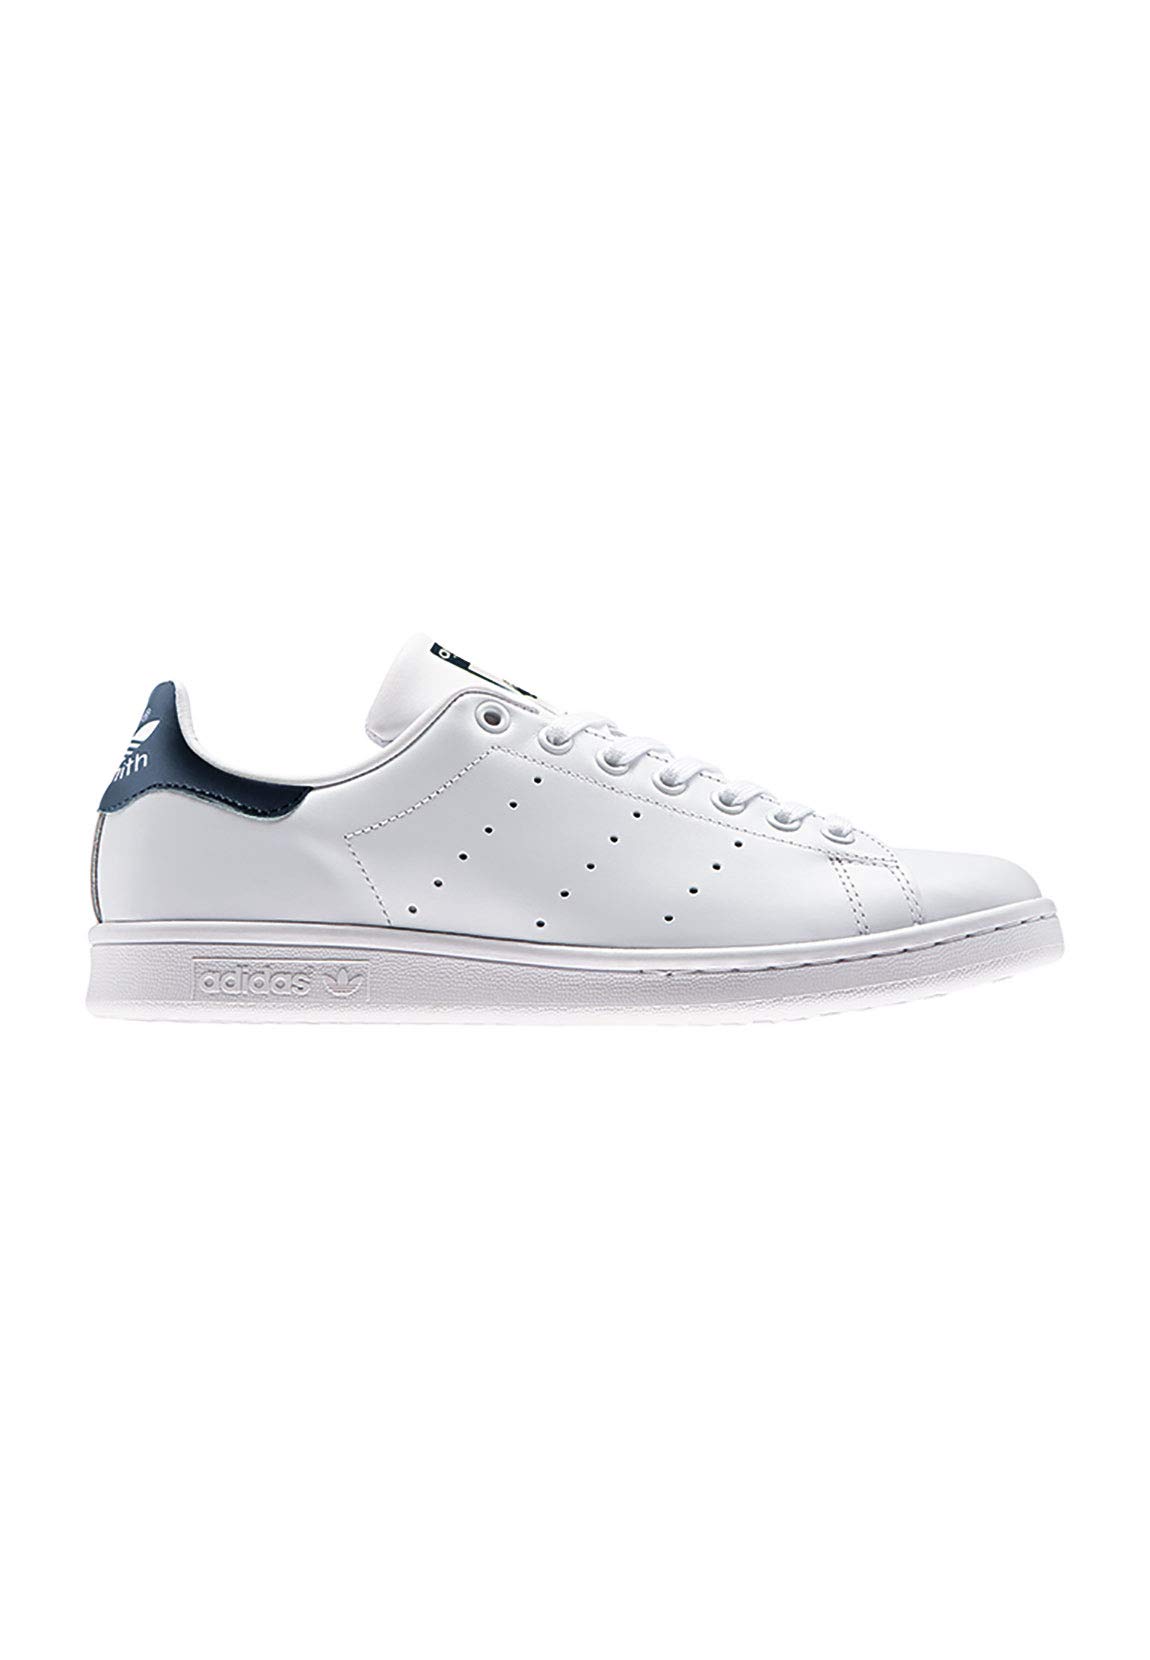 Adidas Stan Smith White Mens Trainers Size 7.5 UK